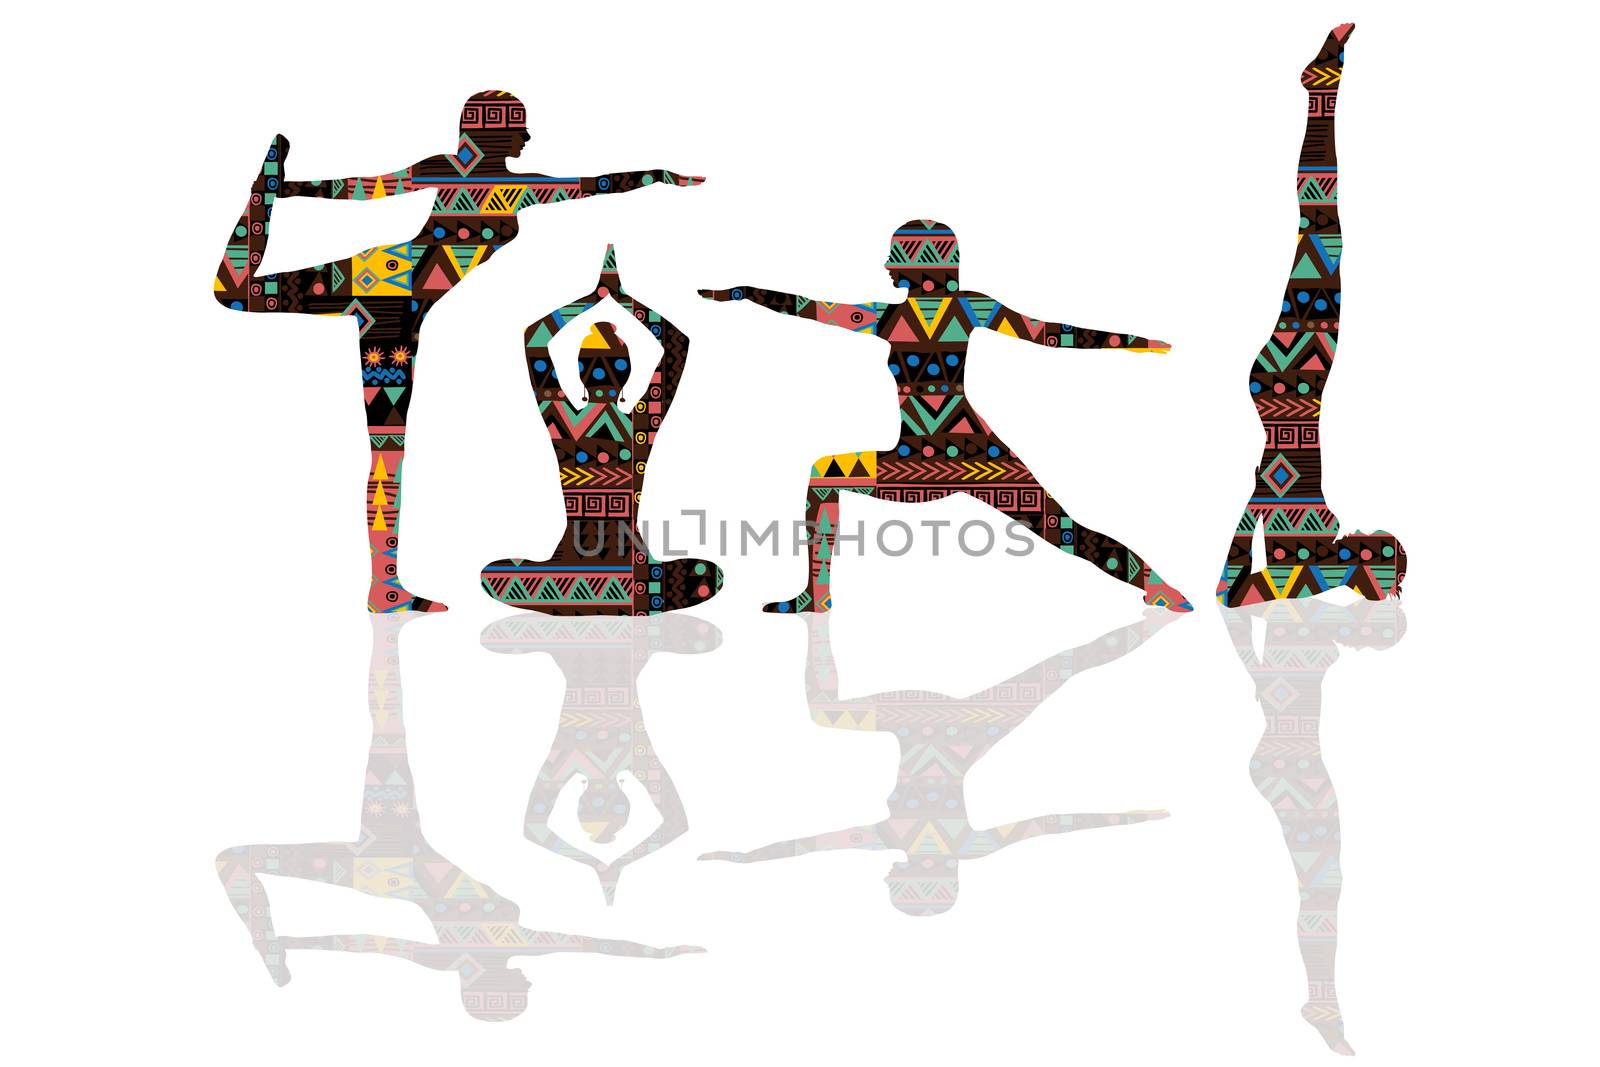 Yoga poses silhouettes witg ethnic motifs pattern by hibrida13